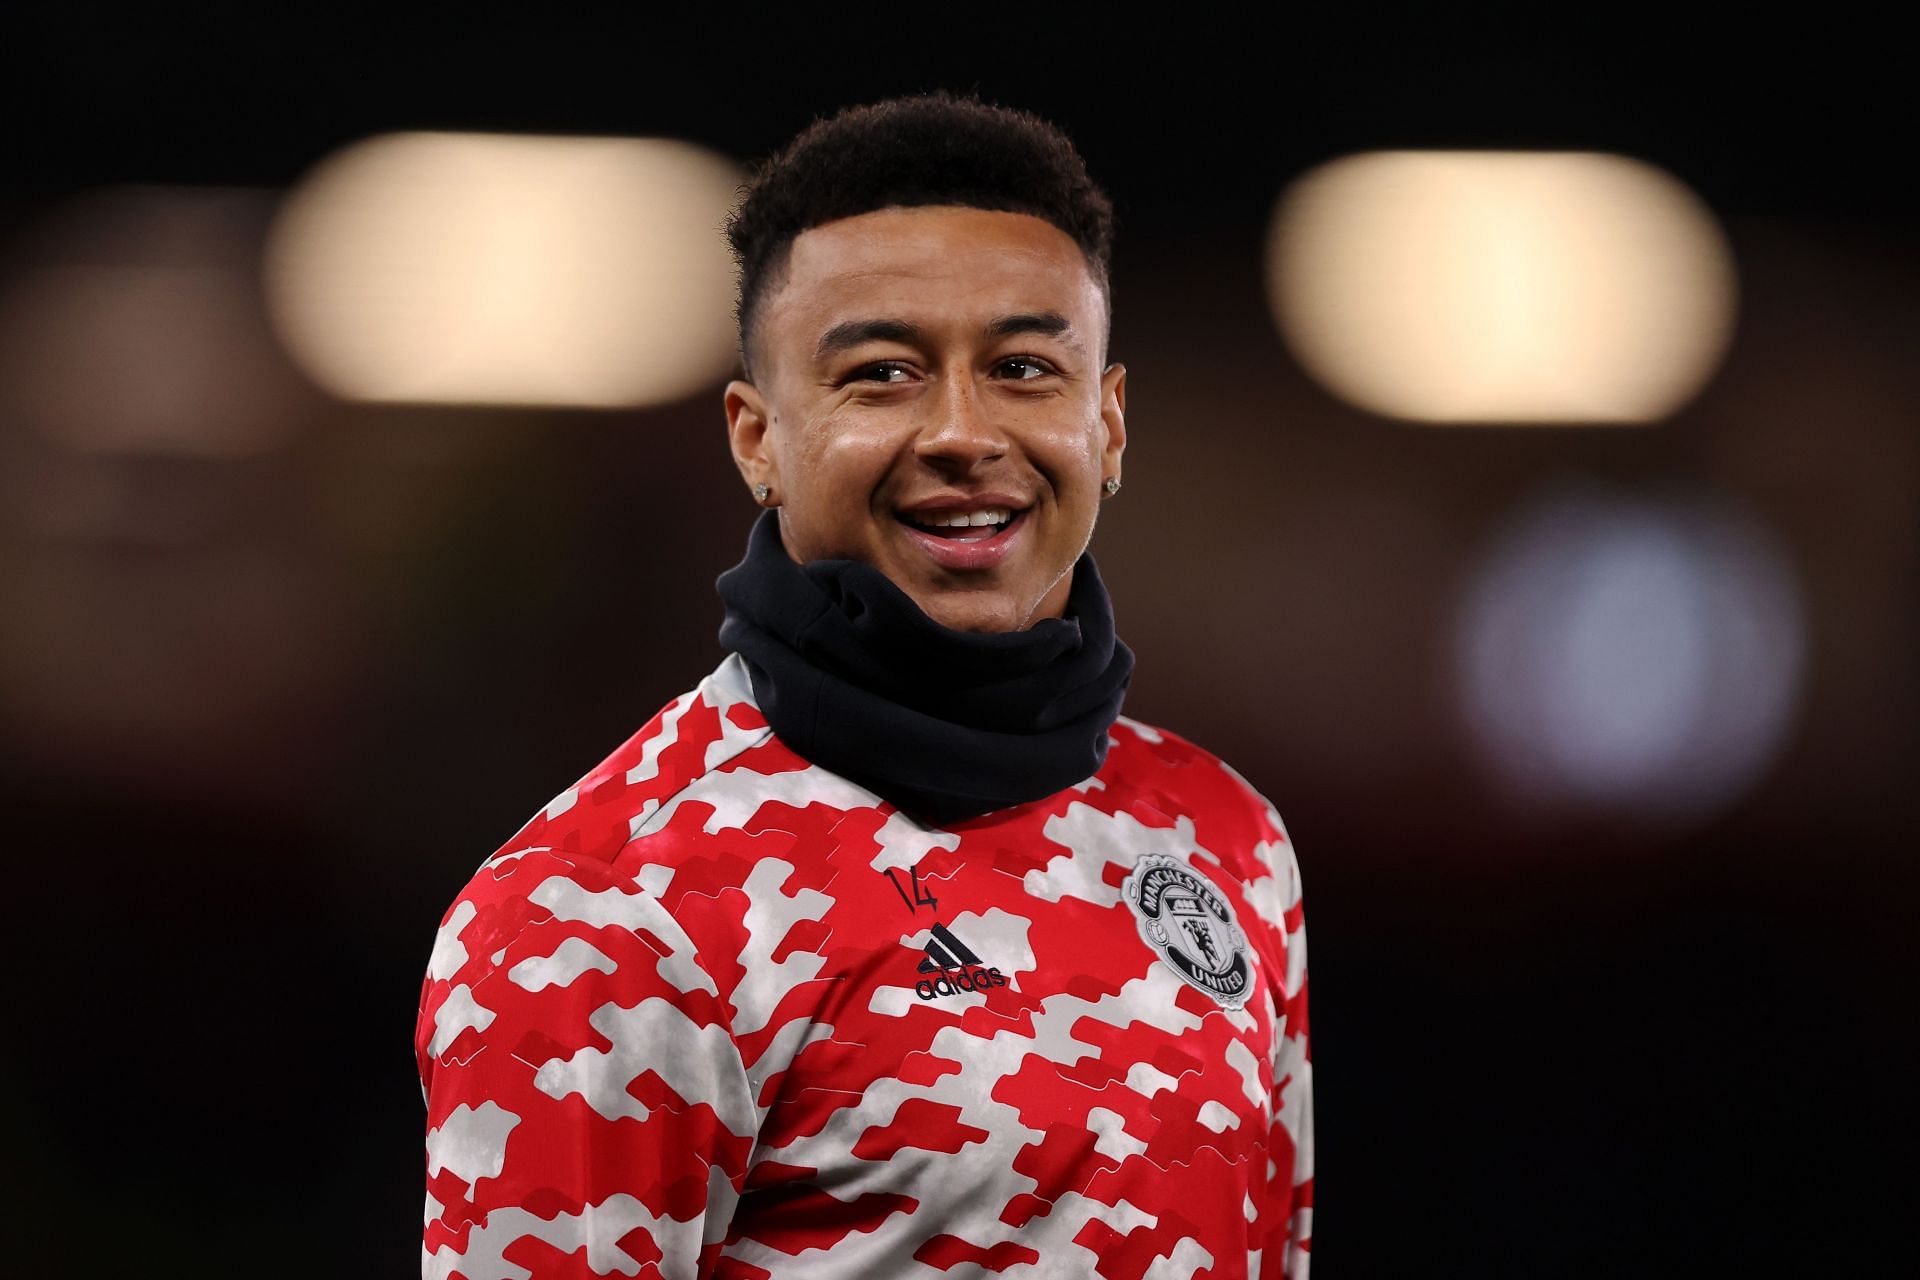 Manchester United midfielder Jesse Lingard has attracted interest from three Premier League clubs.